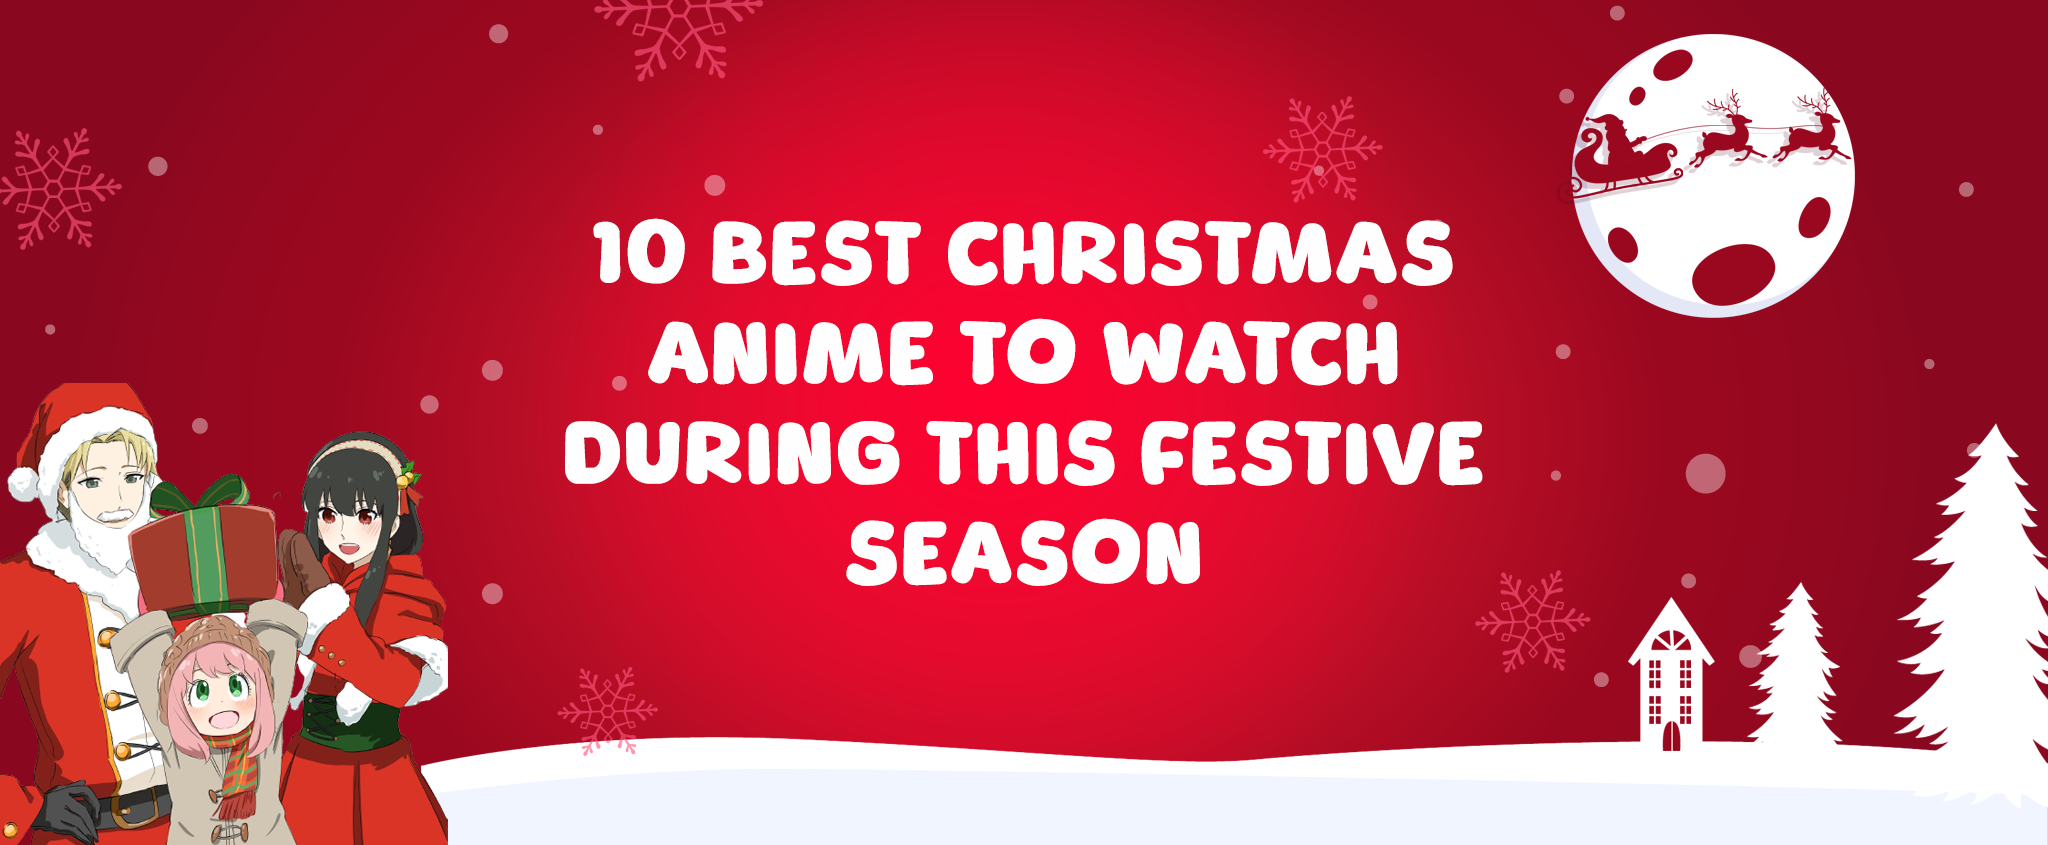 10 Best Christmas Anime To Watch During This Festive Season - CCC  International